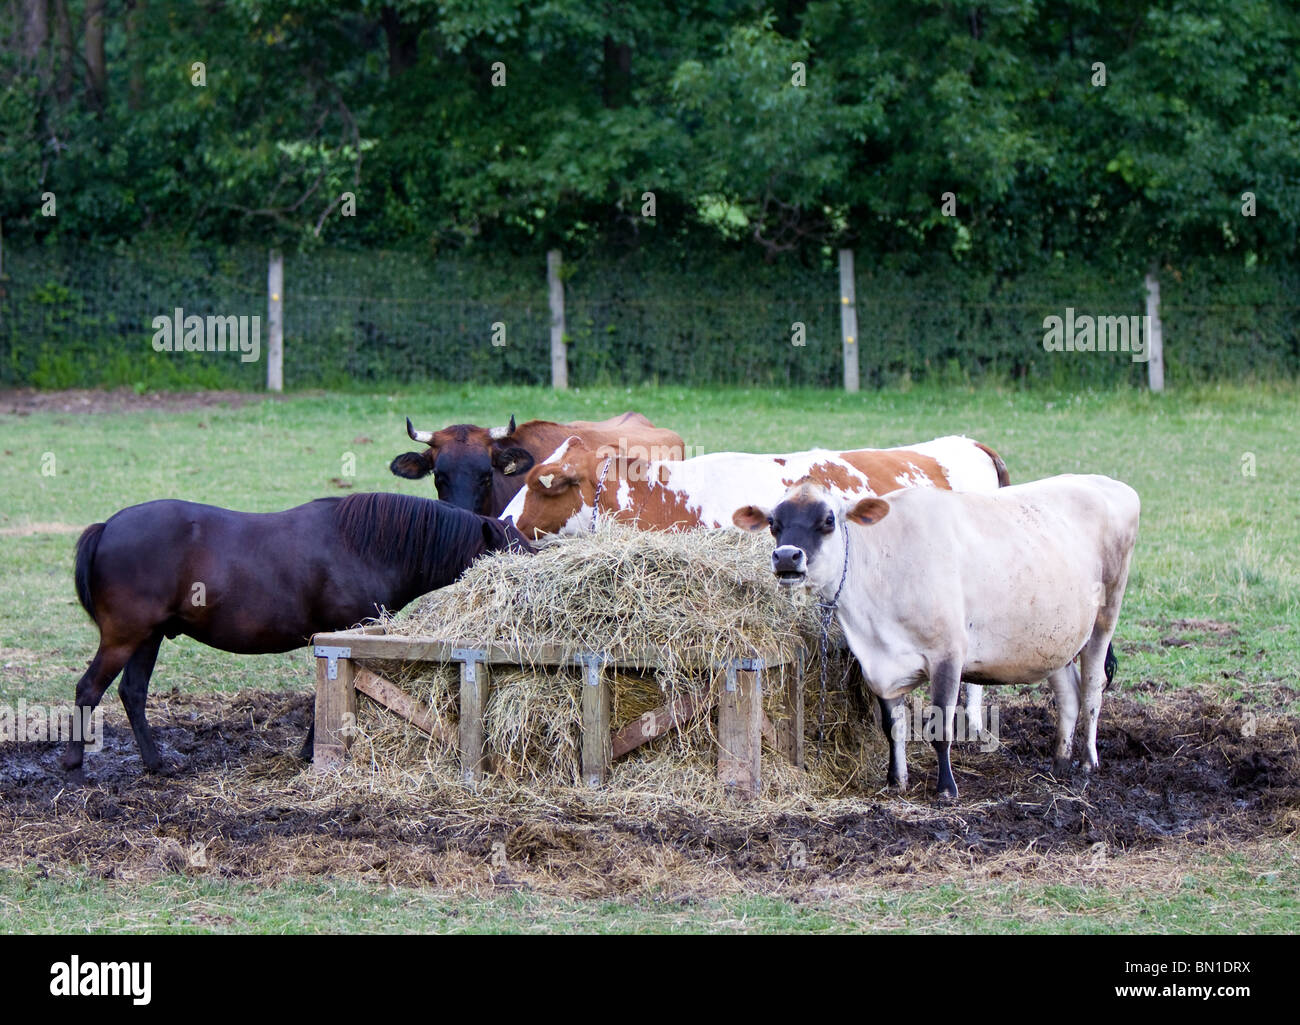 A brown horse and three cows ( cattles ) are eating grass from the manger. Stock Photo